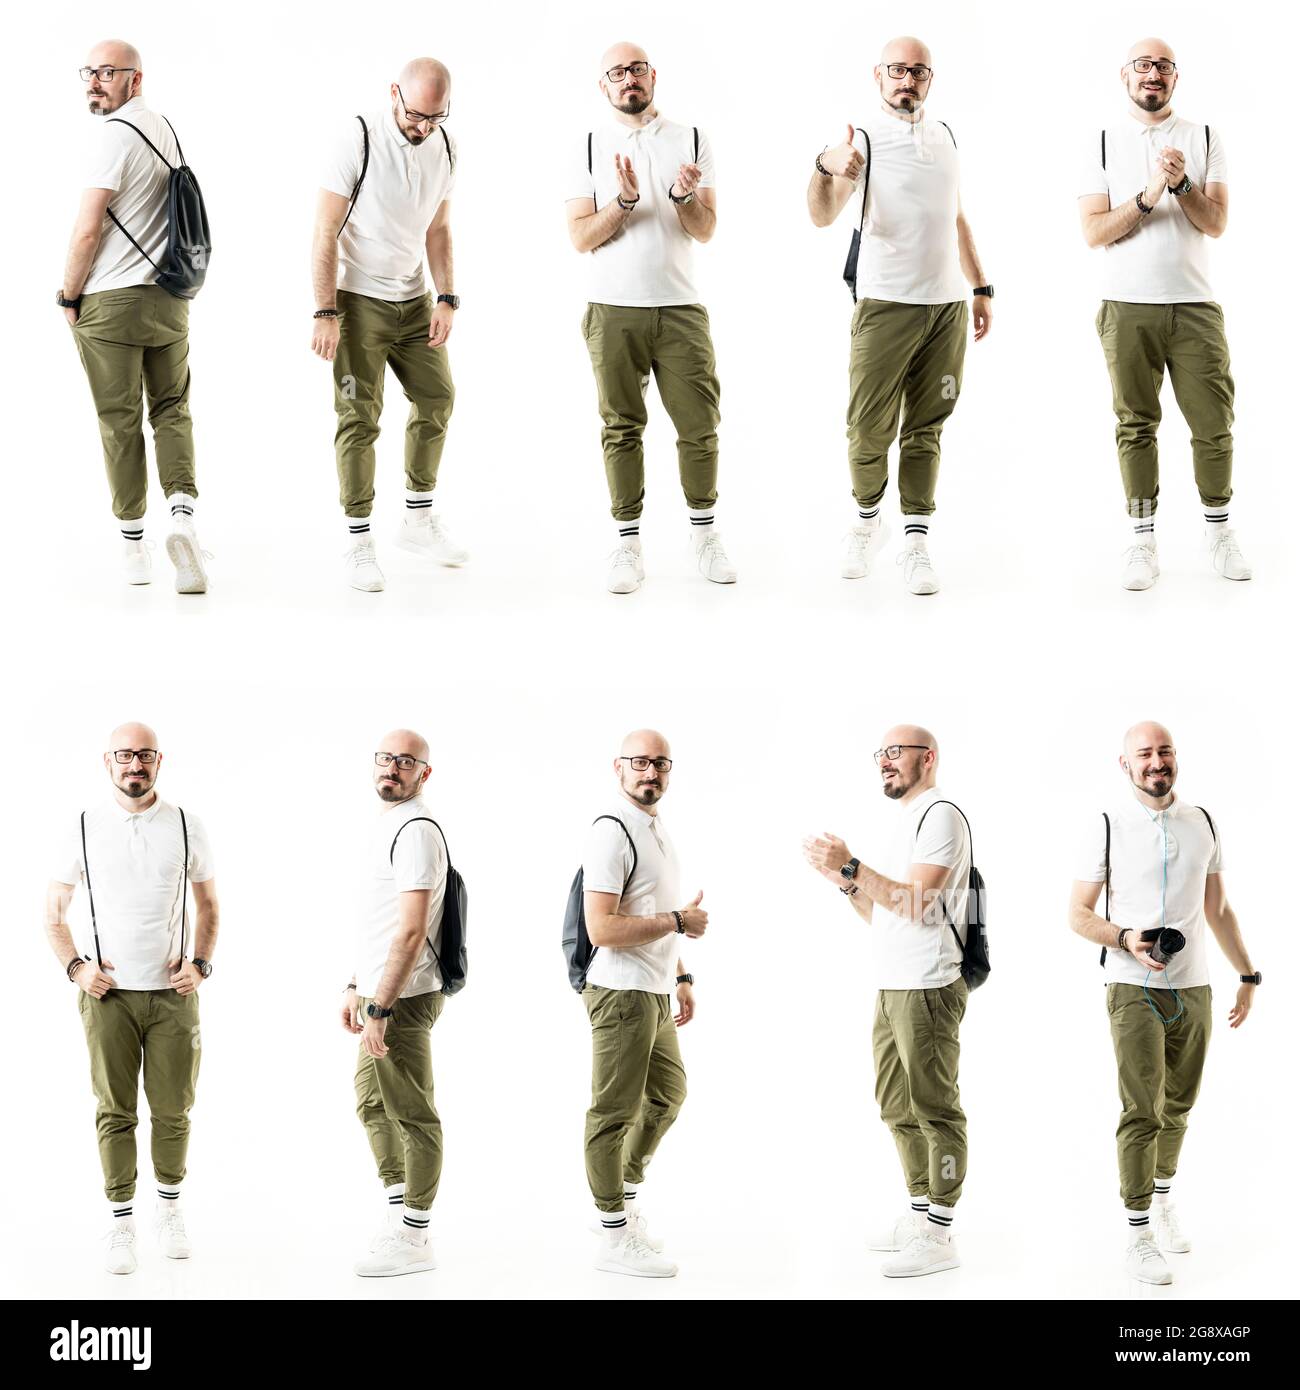 Group of happy people stylish bald geek hipster males applauding and supporting gestures. Full body people isolated on white background Stock Photo